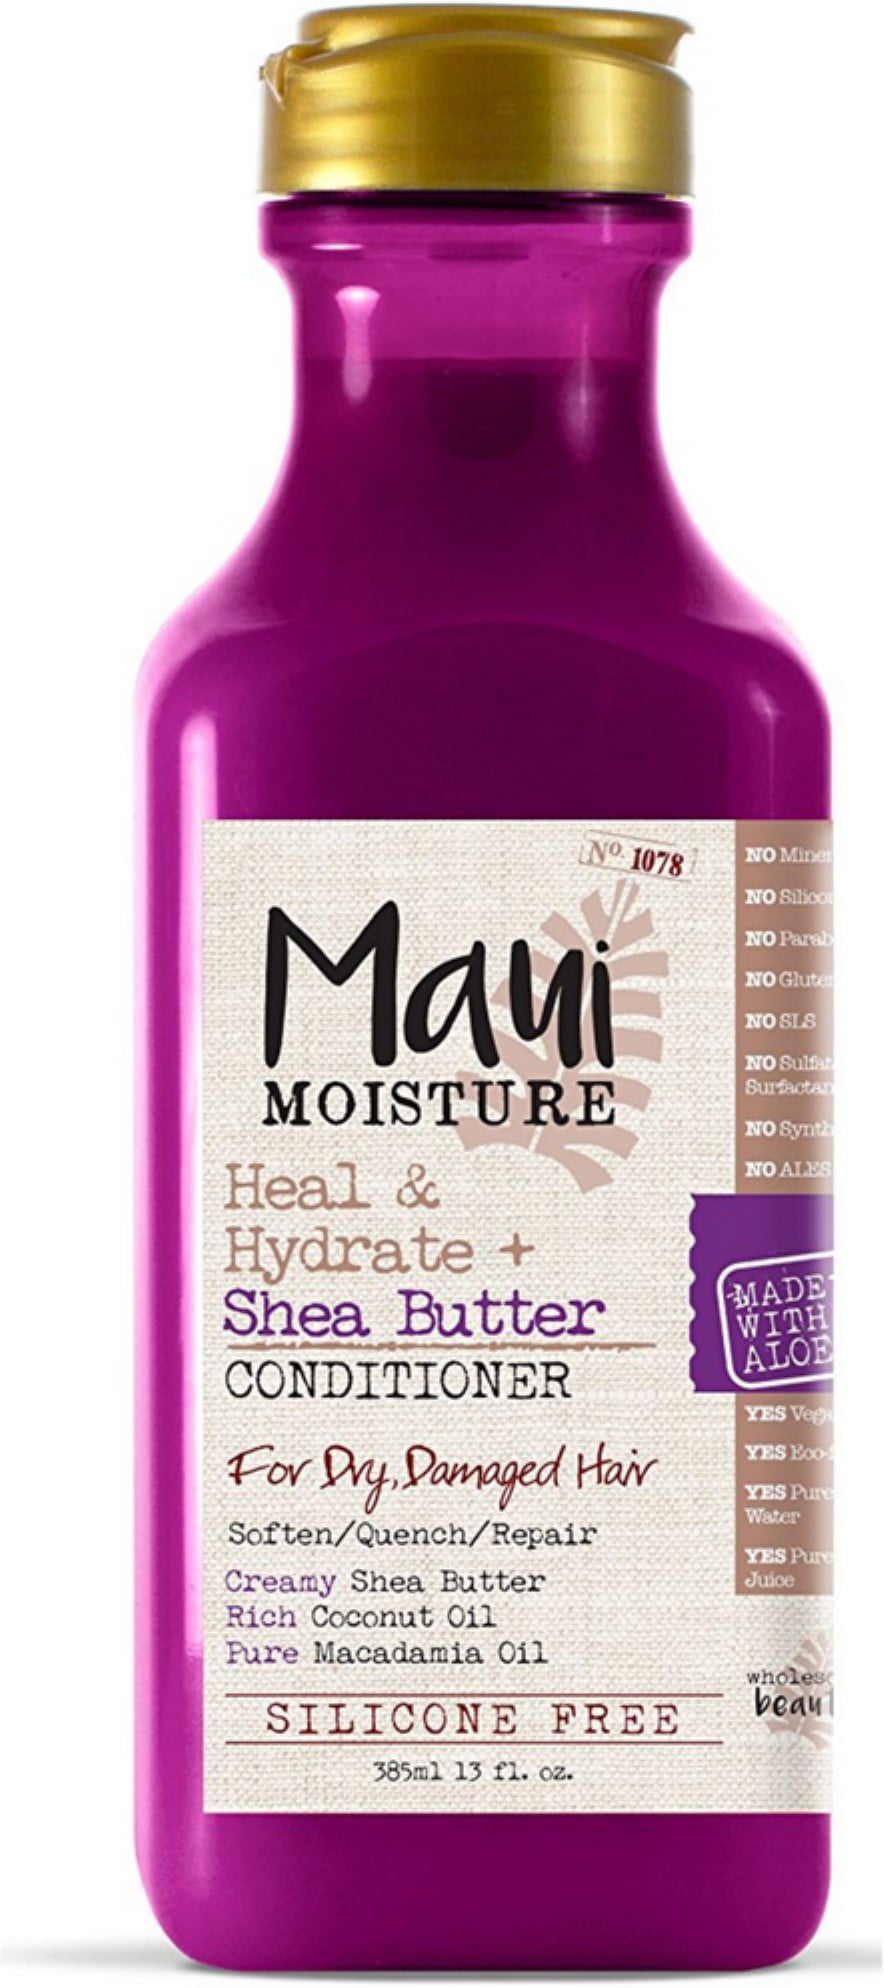 Maui Moisture Heal Hydrate Shea Butter Conditioner Oz Pack Of